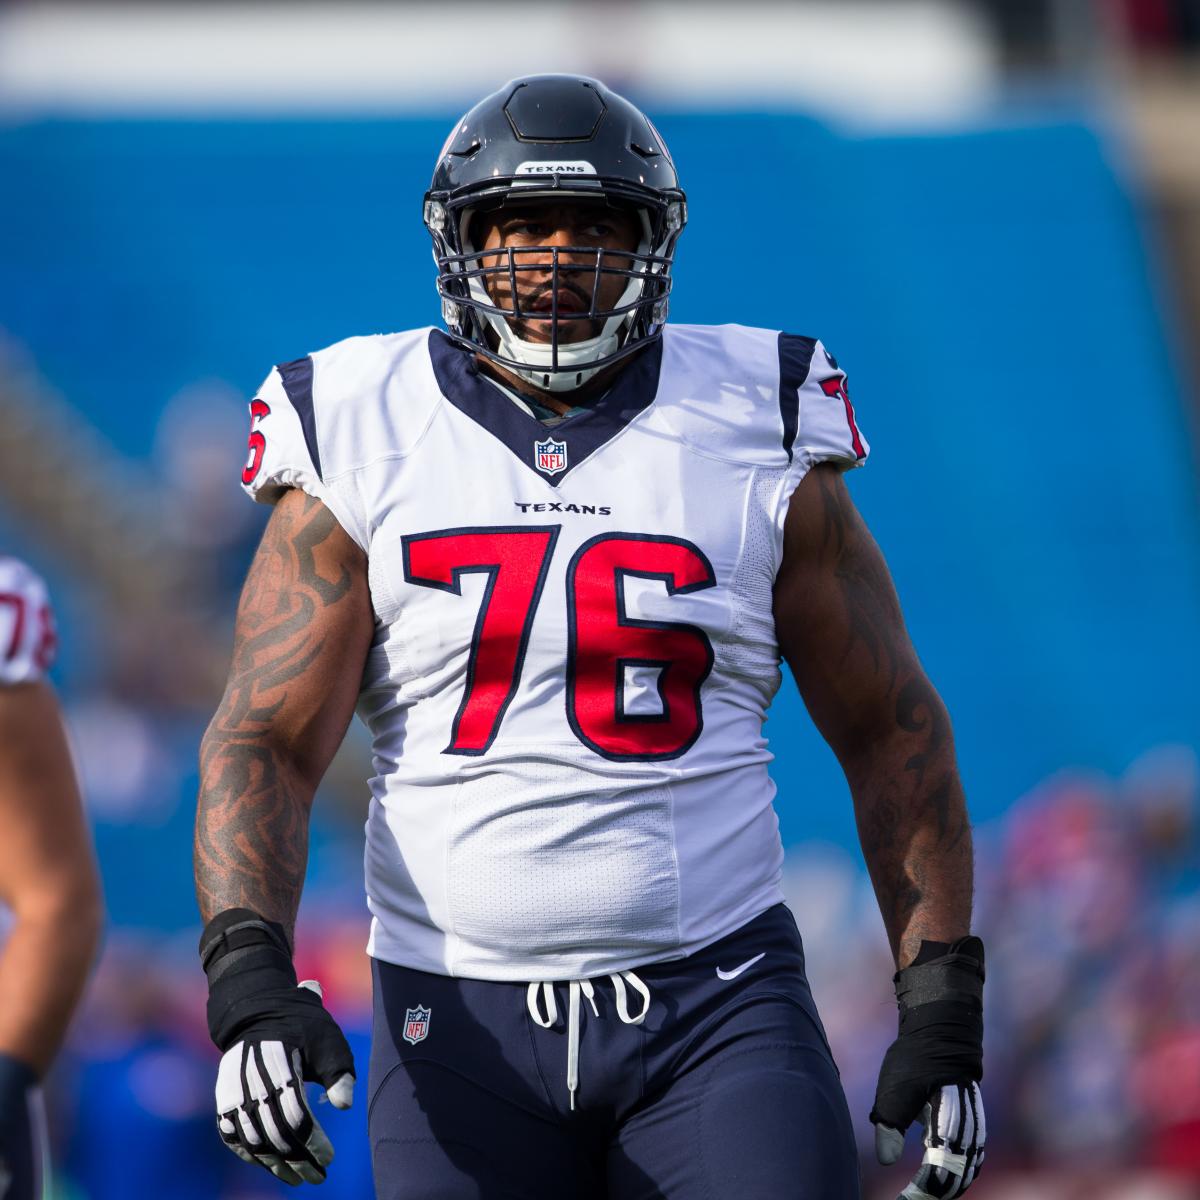 Duane Brown holdout: Texans LT likely to miss Jaguars game - Big